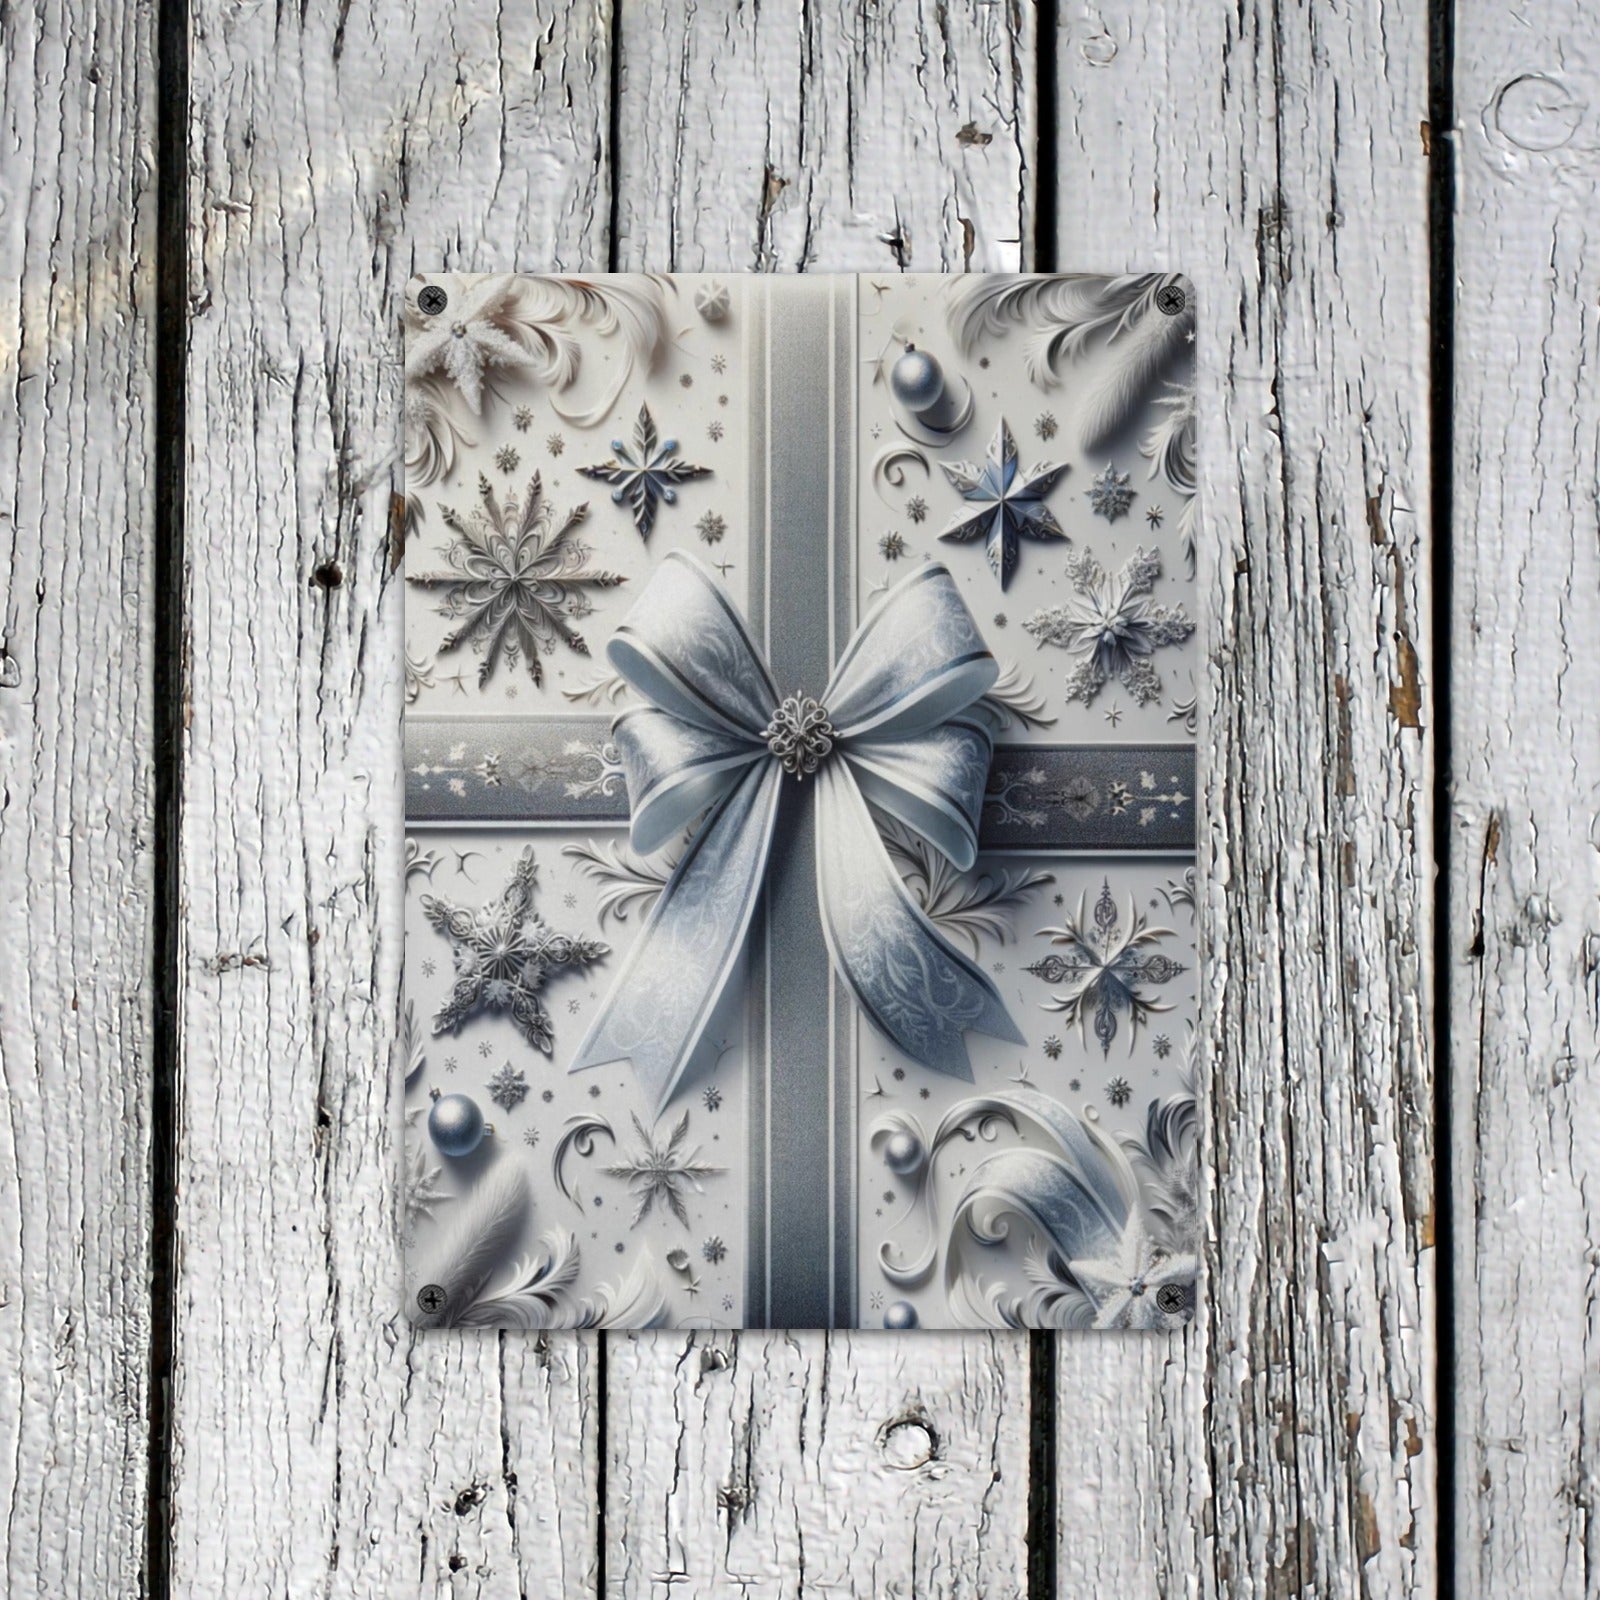 Silver & White Gift Wrap Metal Sign | 12x16" Christmas Holiday Decor | Indoor/Outdoor Wall Art by MIWallArt